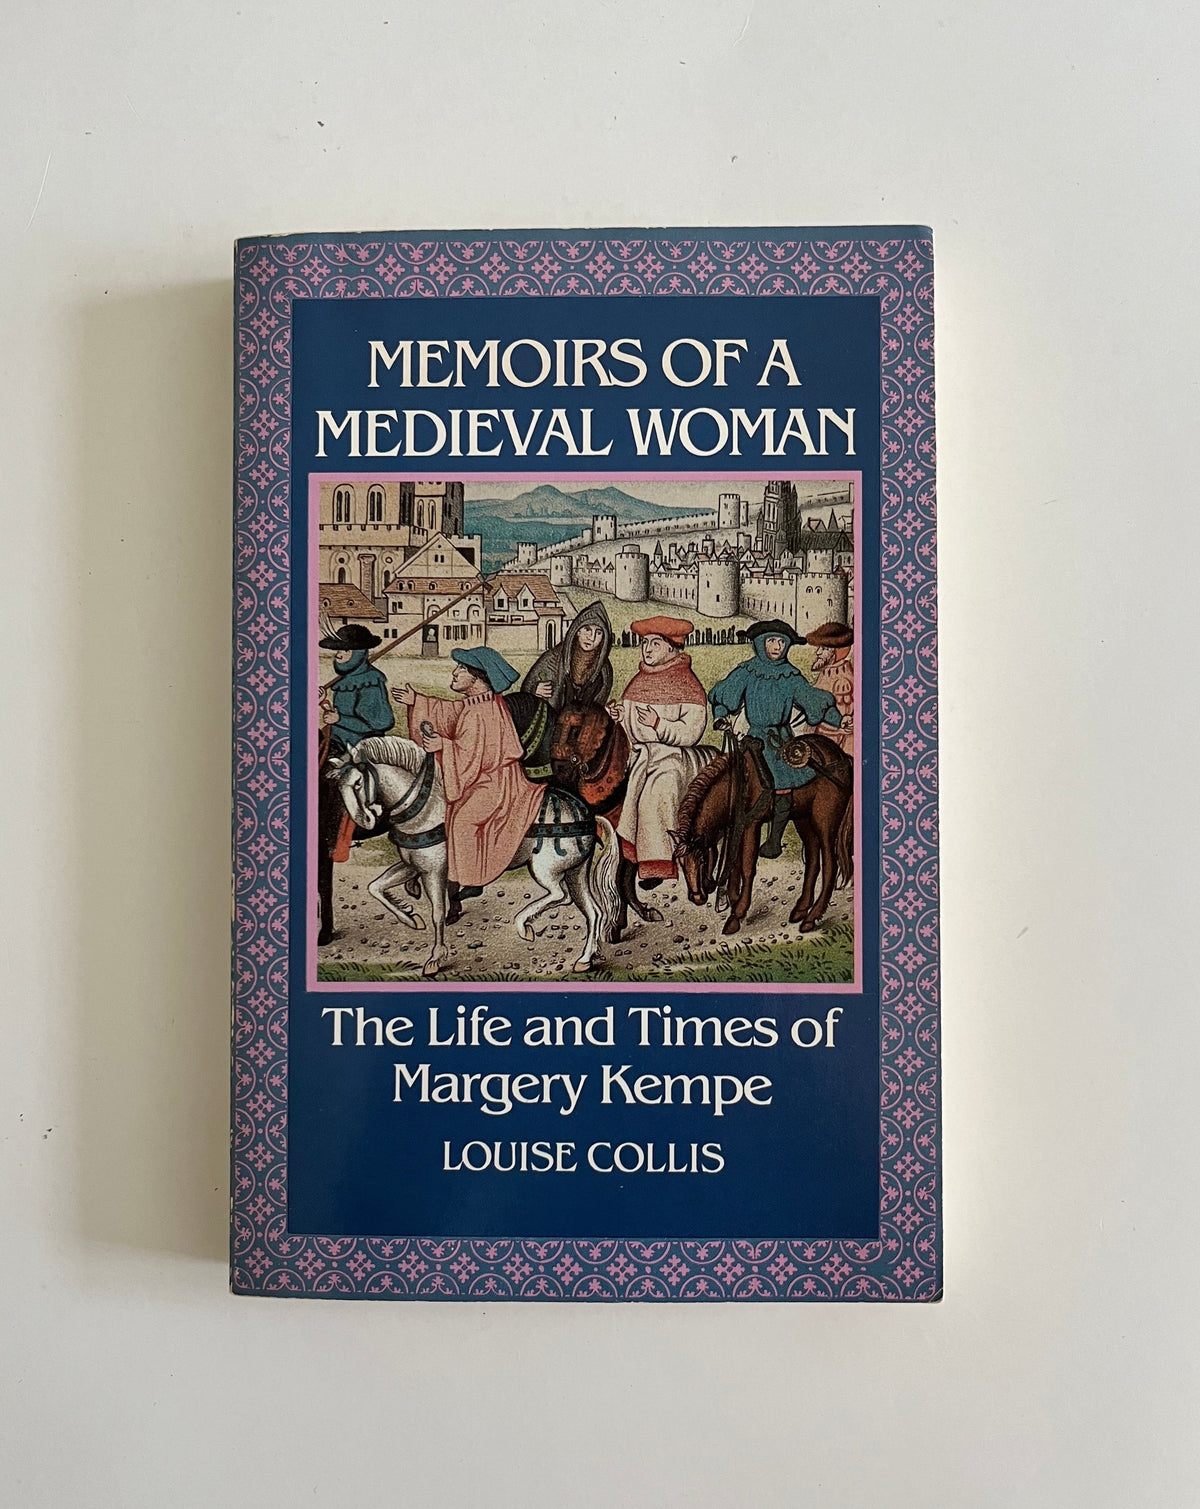 Memoirs of a Medieval Woman: The Life and Times of Margery Kempe by Louise Collis